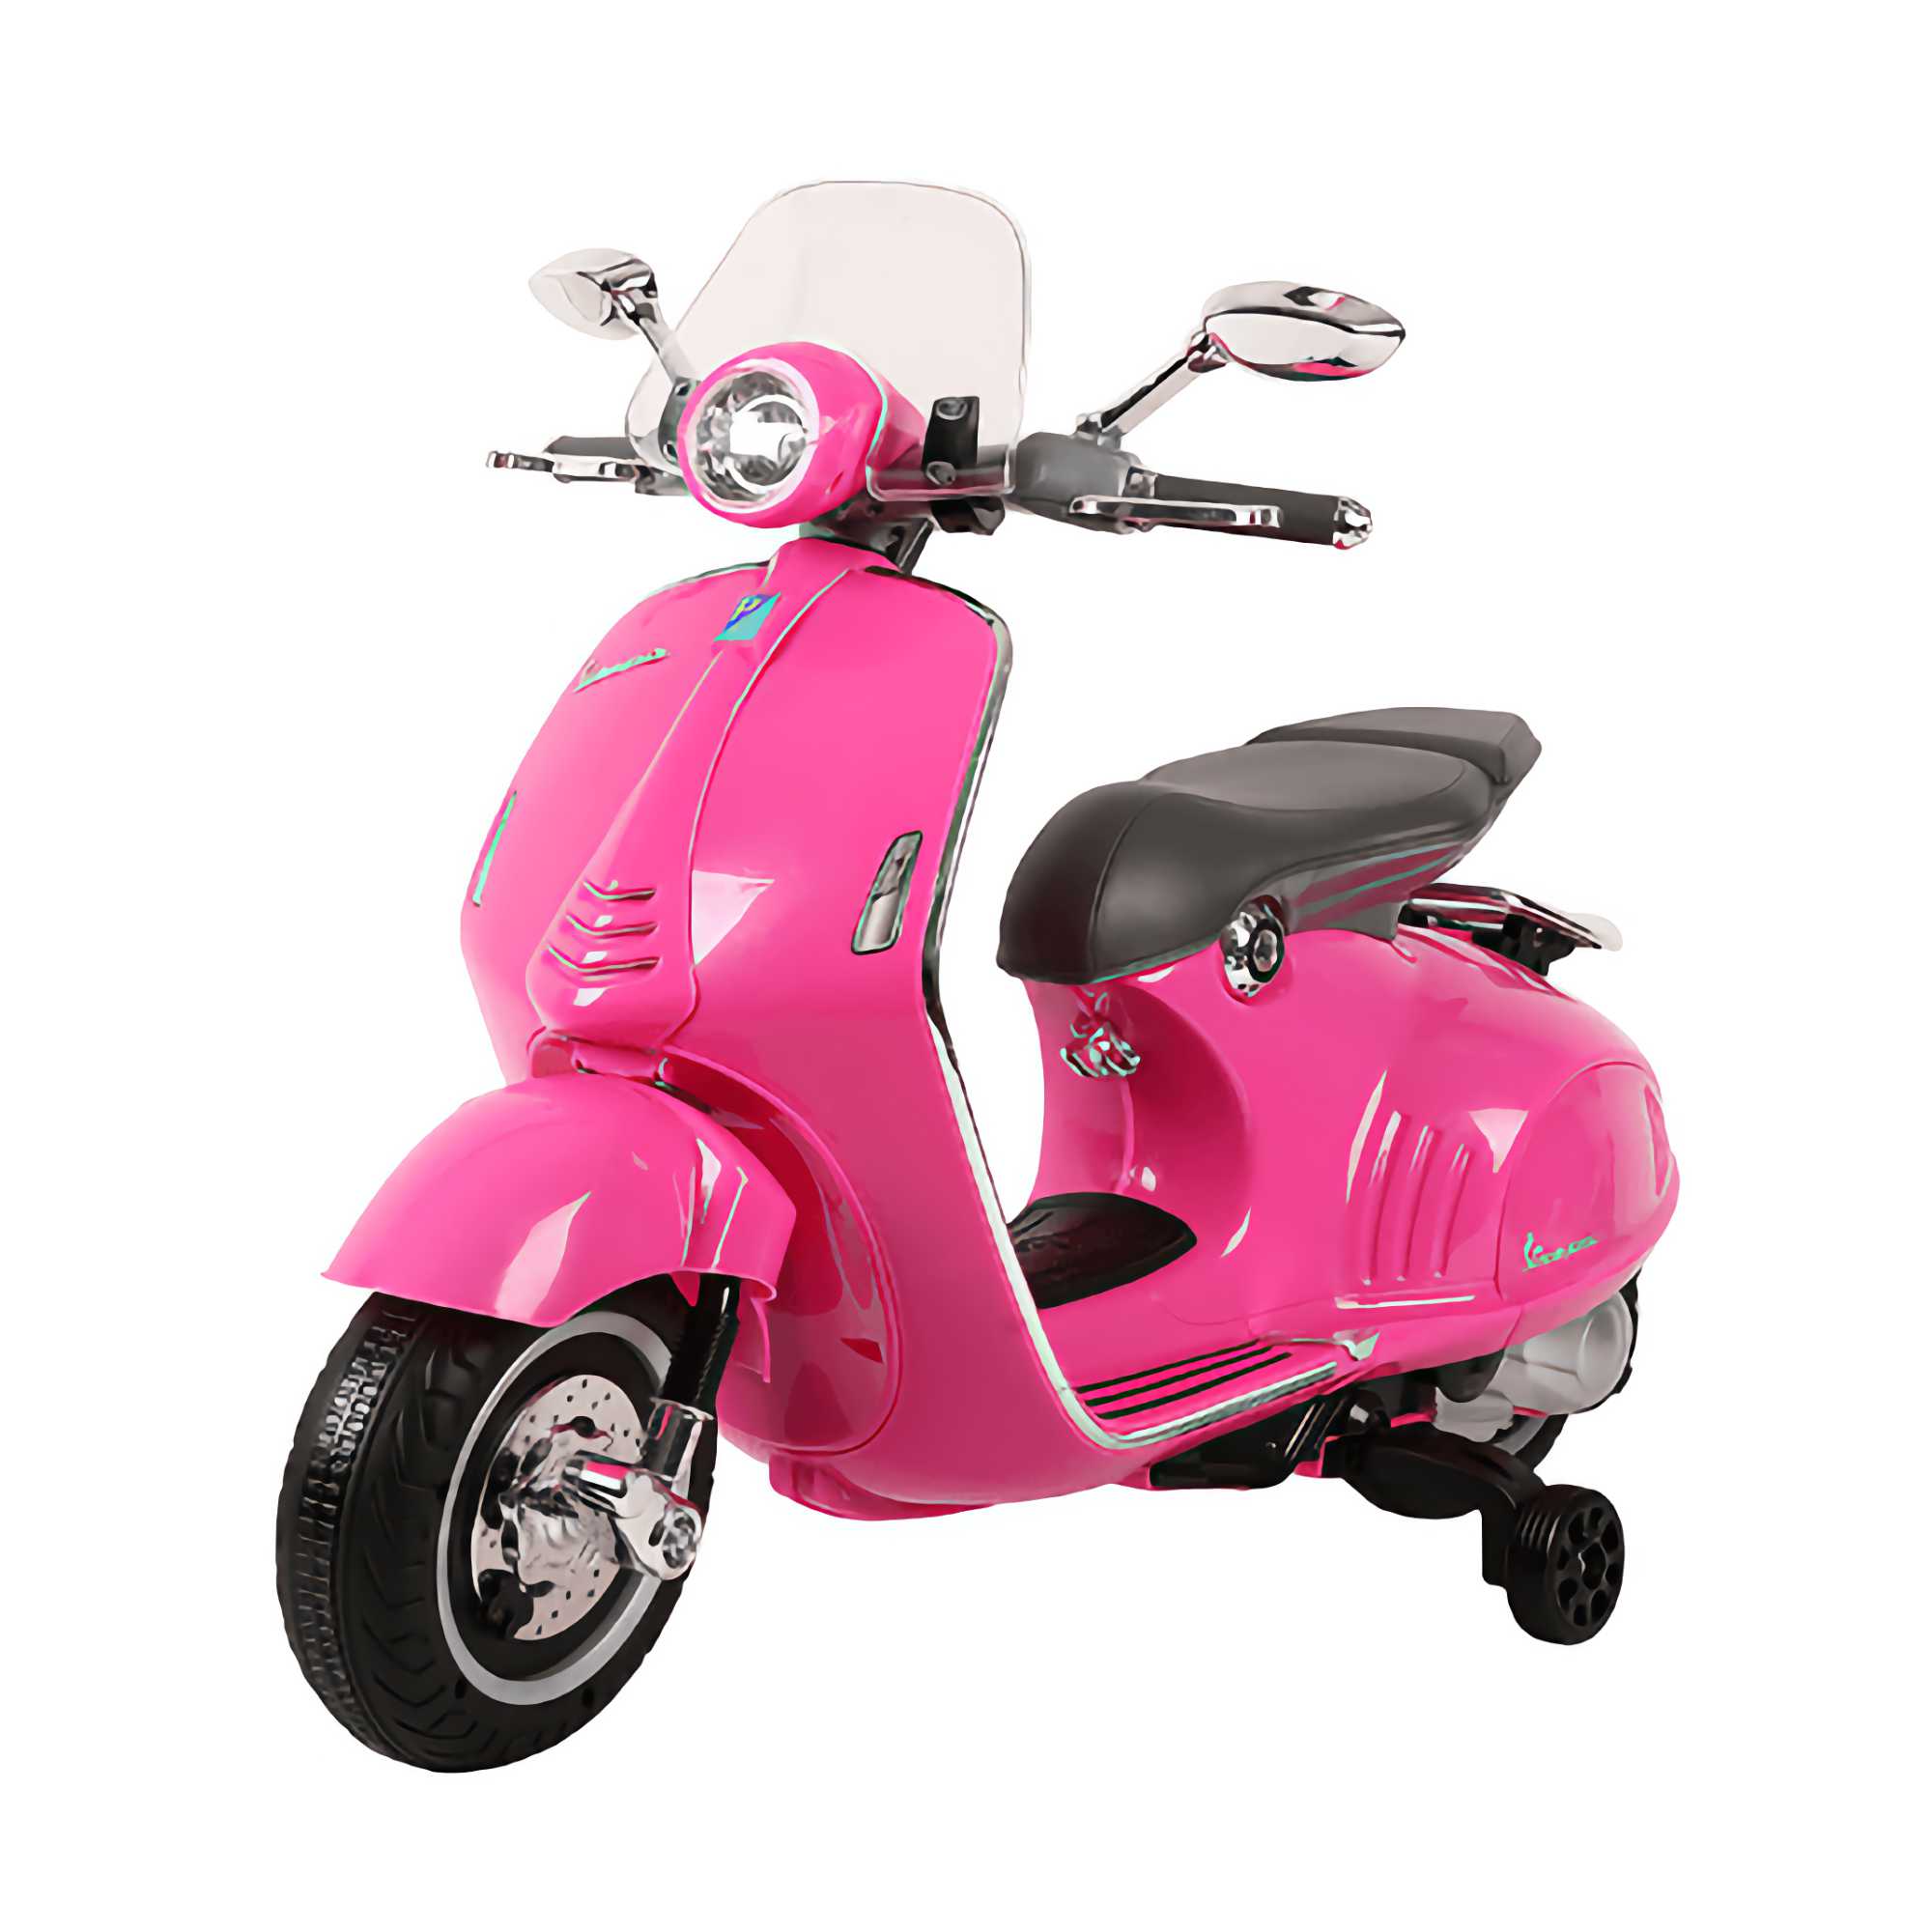 Vespa 946 children electric scooter, hot pink